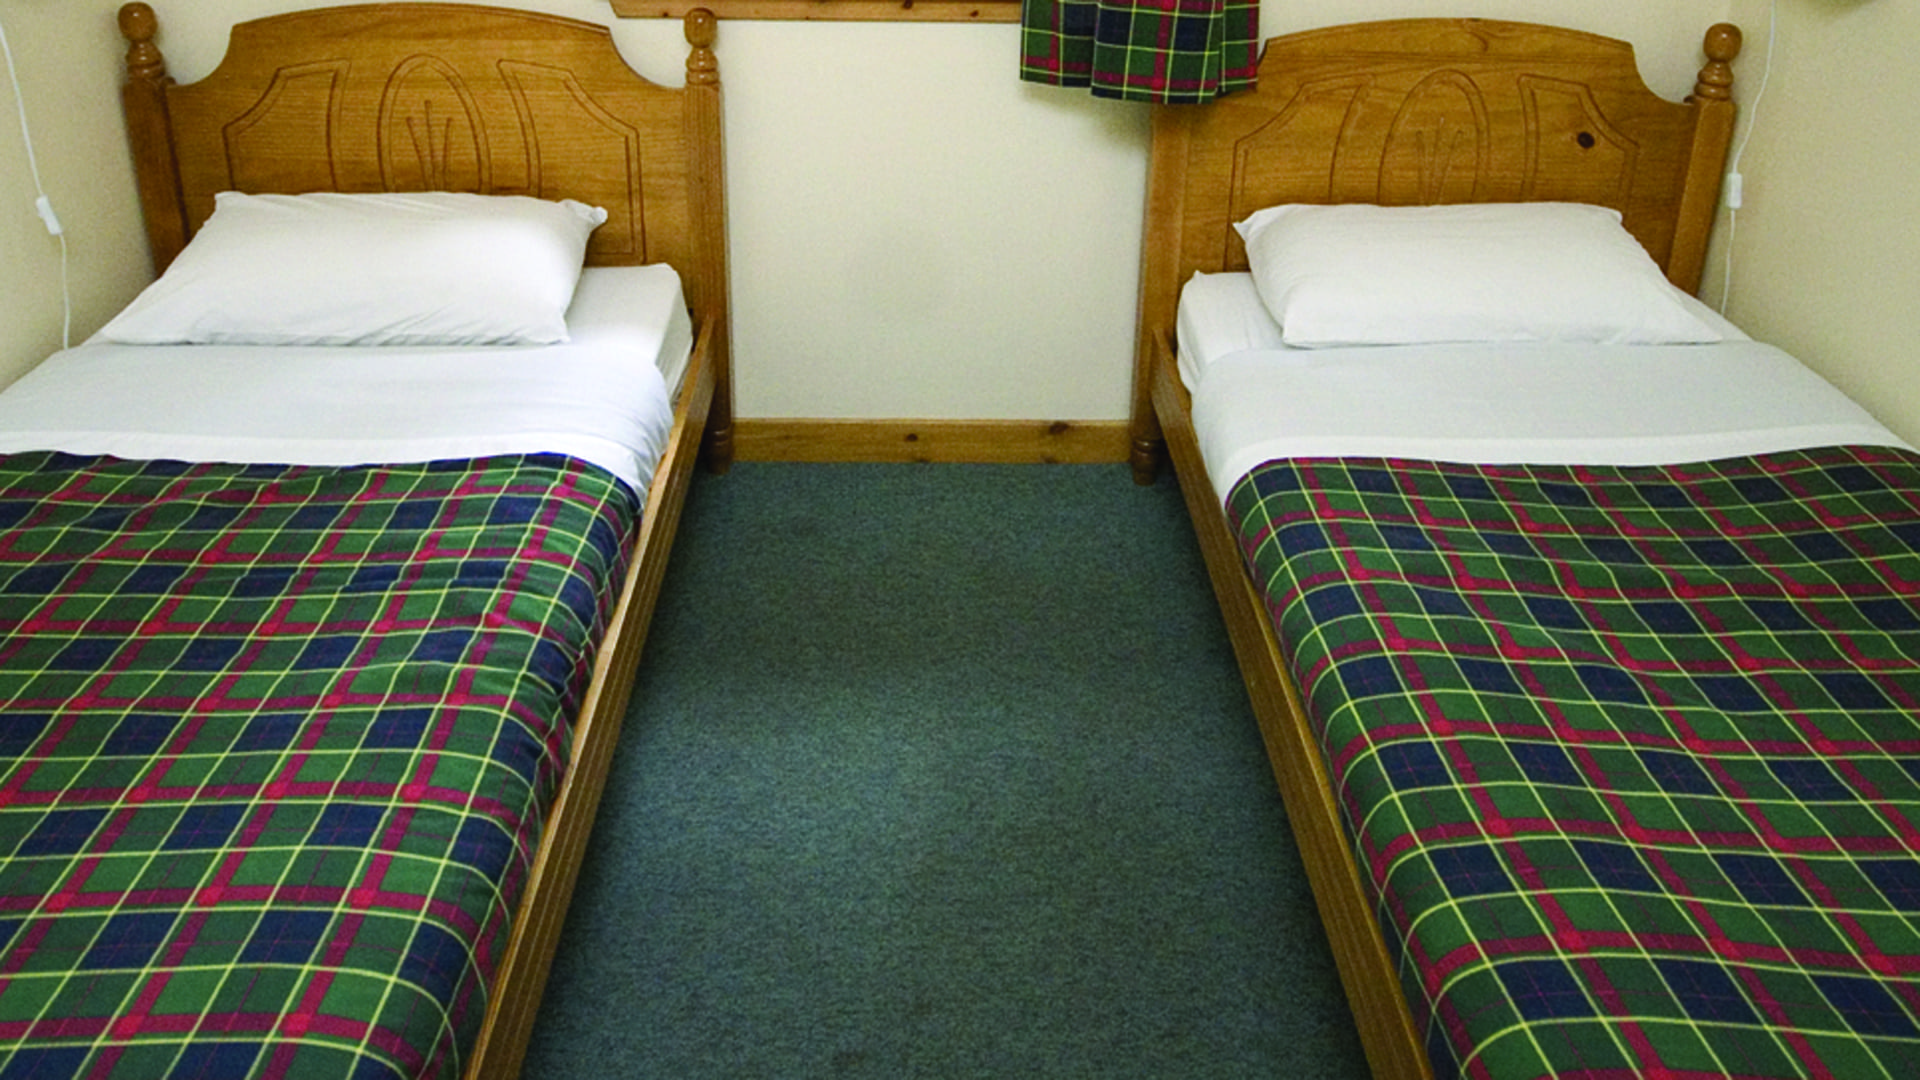 Hostels with private bedrooms By the Way in Scotland